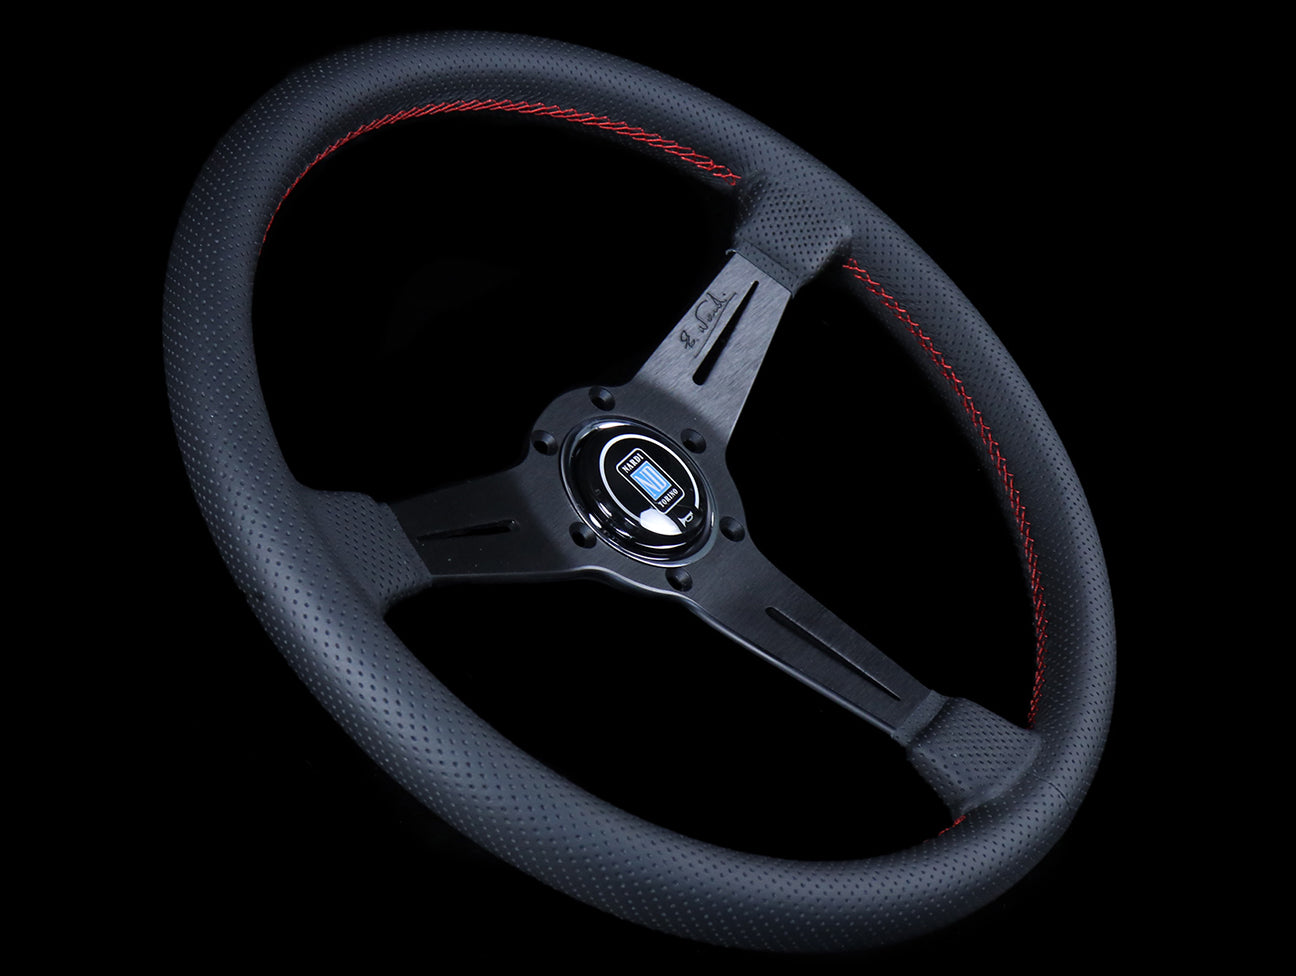 Nardi Classic 360mm Steering Wheel - Black Perforated Leather / Red Stitch